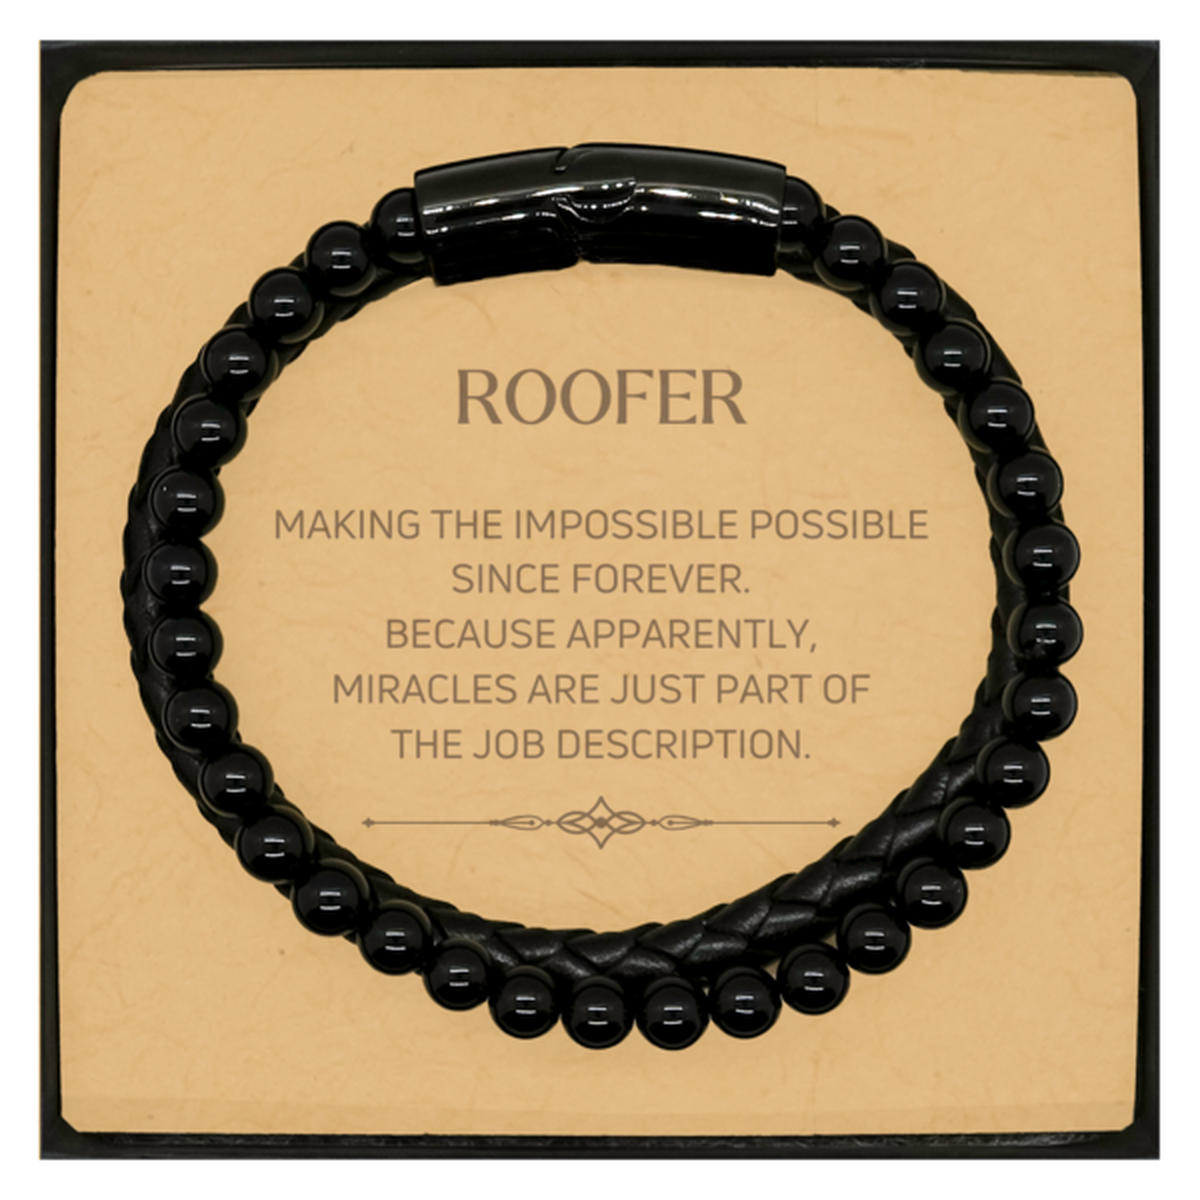 Funny Roofer Gifts, Miracles are just part of the job description, Inspirational Birthday Christmas Stone Leather Bracelets For Roofer, Men, Women, Coworkers, Friends, Boss